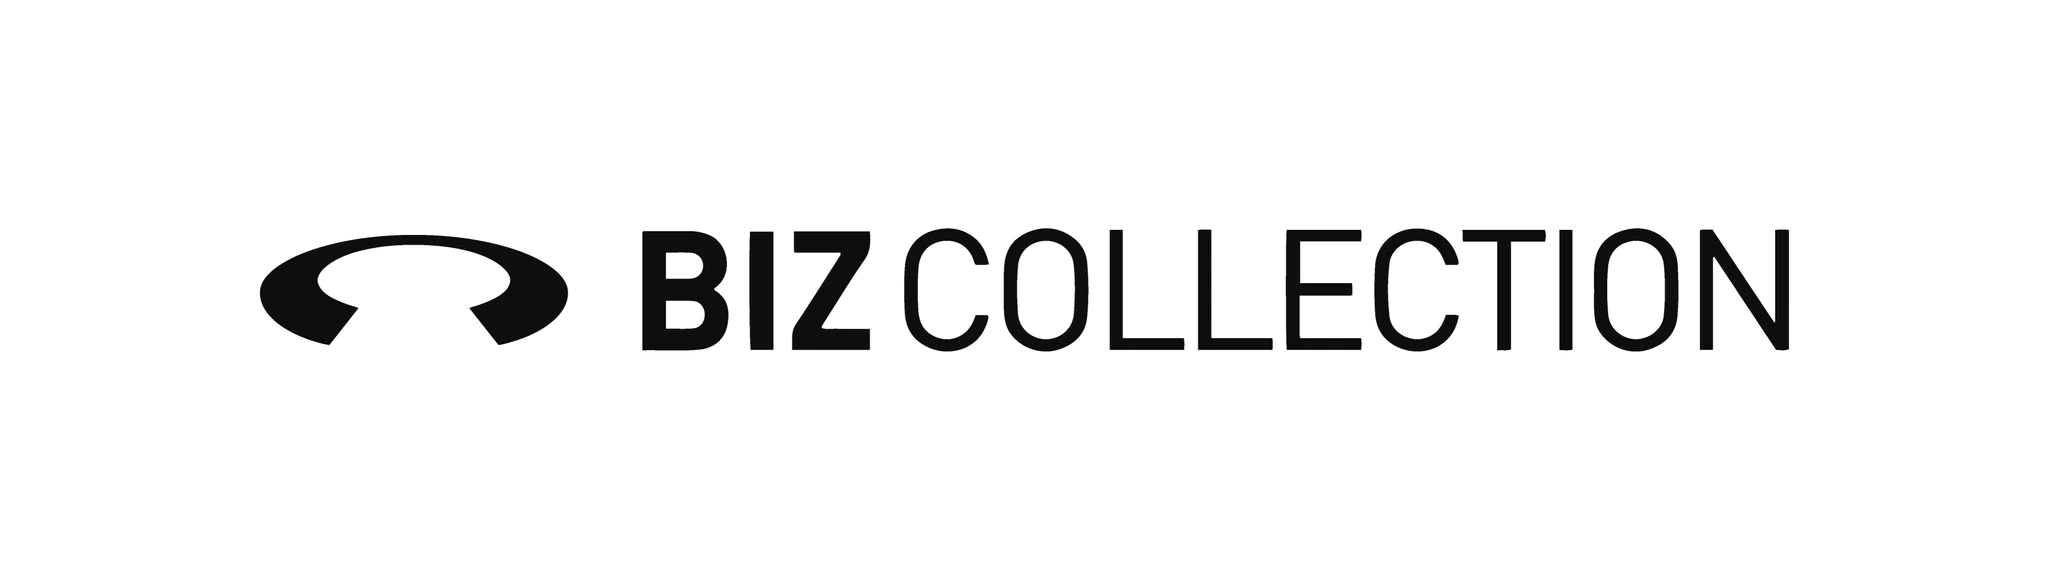 Biz Collection Logo, showcasing modern and professional typography.